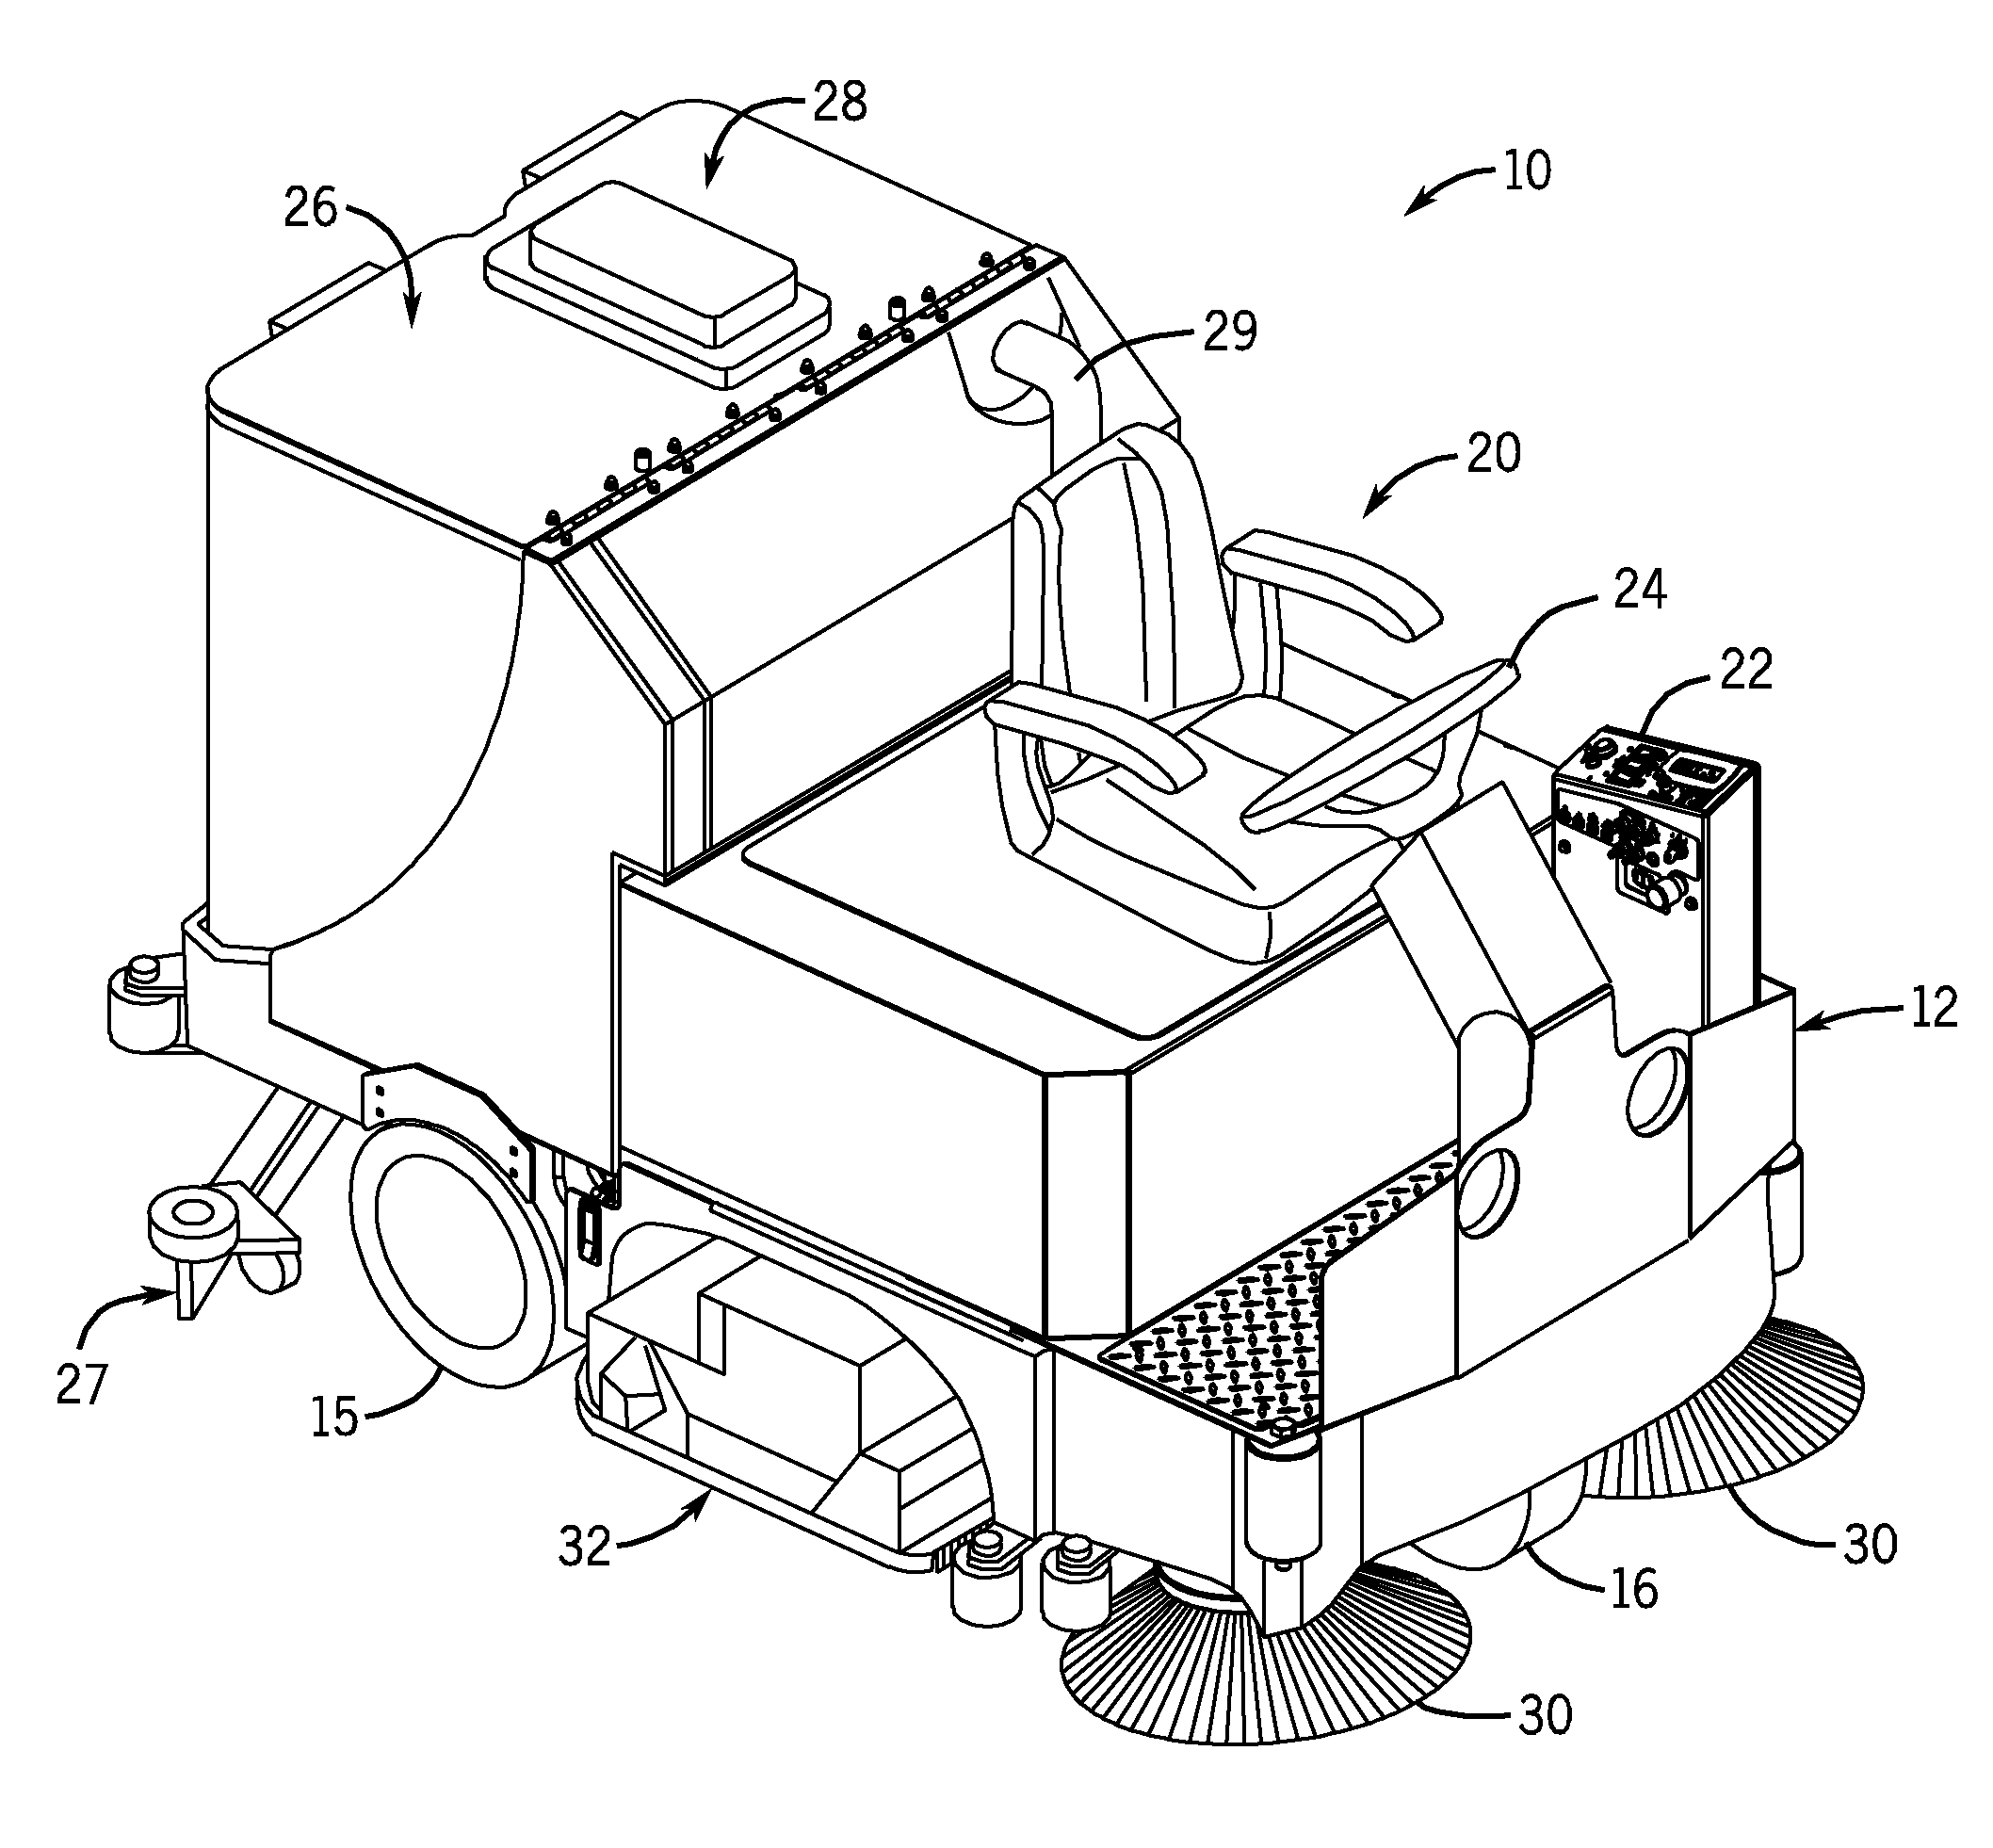 Fluid heating system for a cleaning device